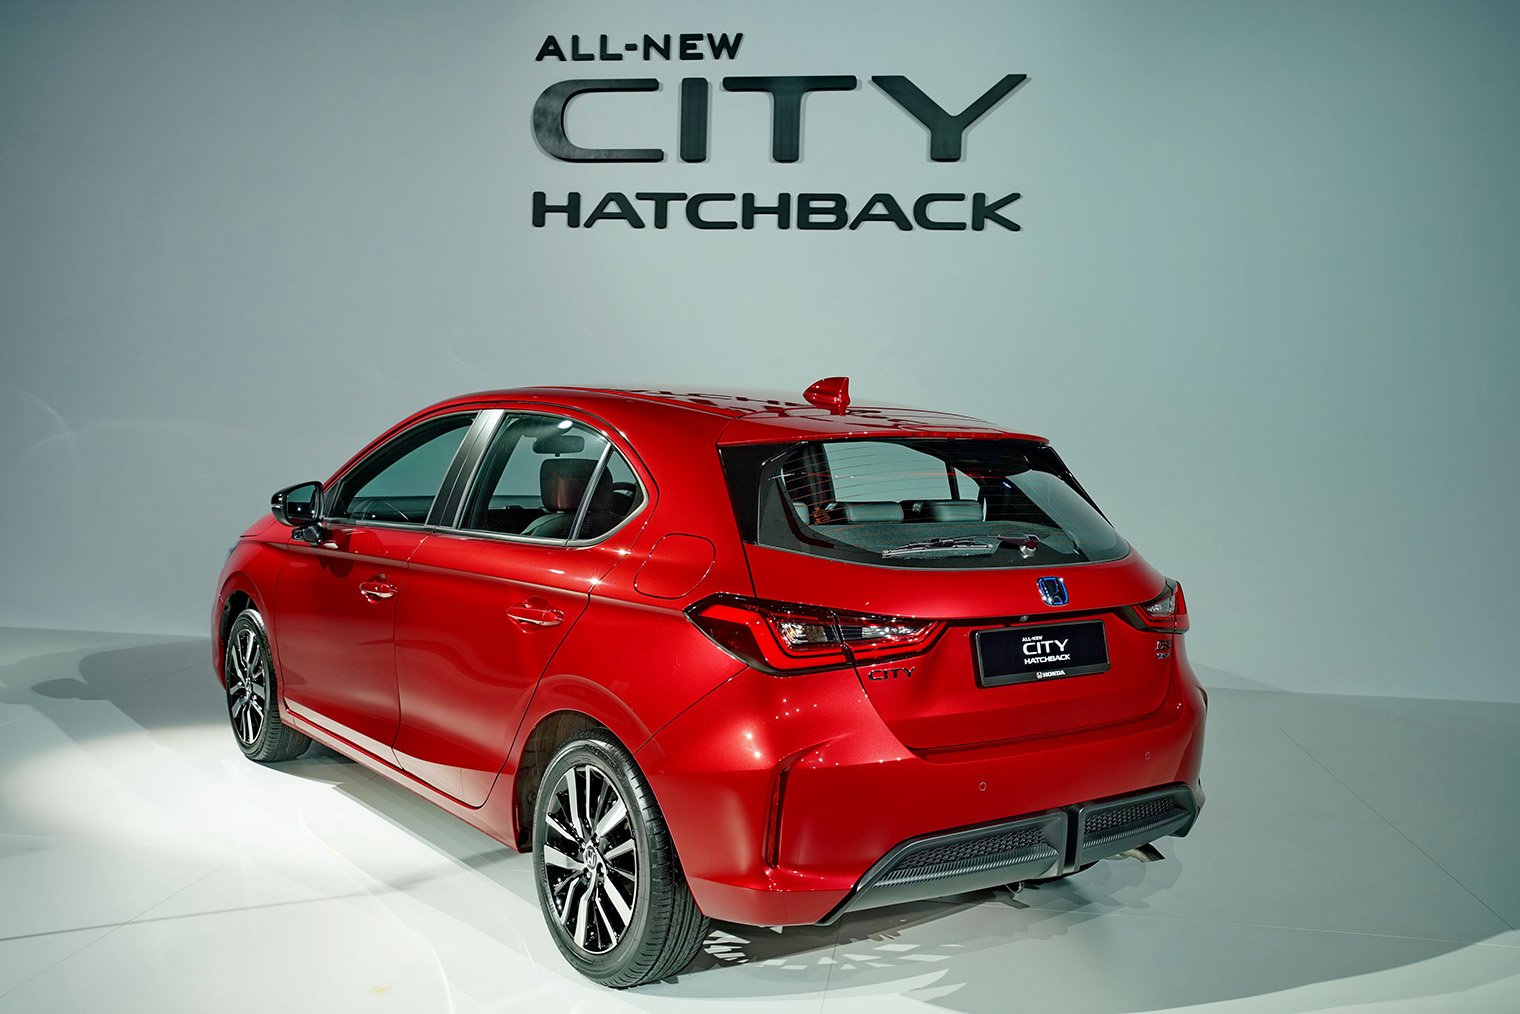 The All-New City Hatchback has a sporty yet premium outlook, embodies a lifestyle concept.